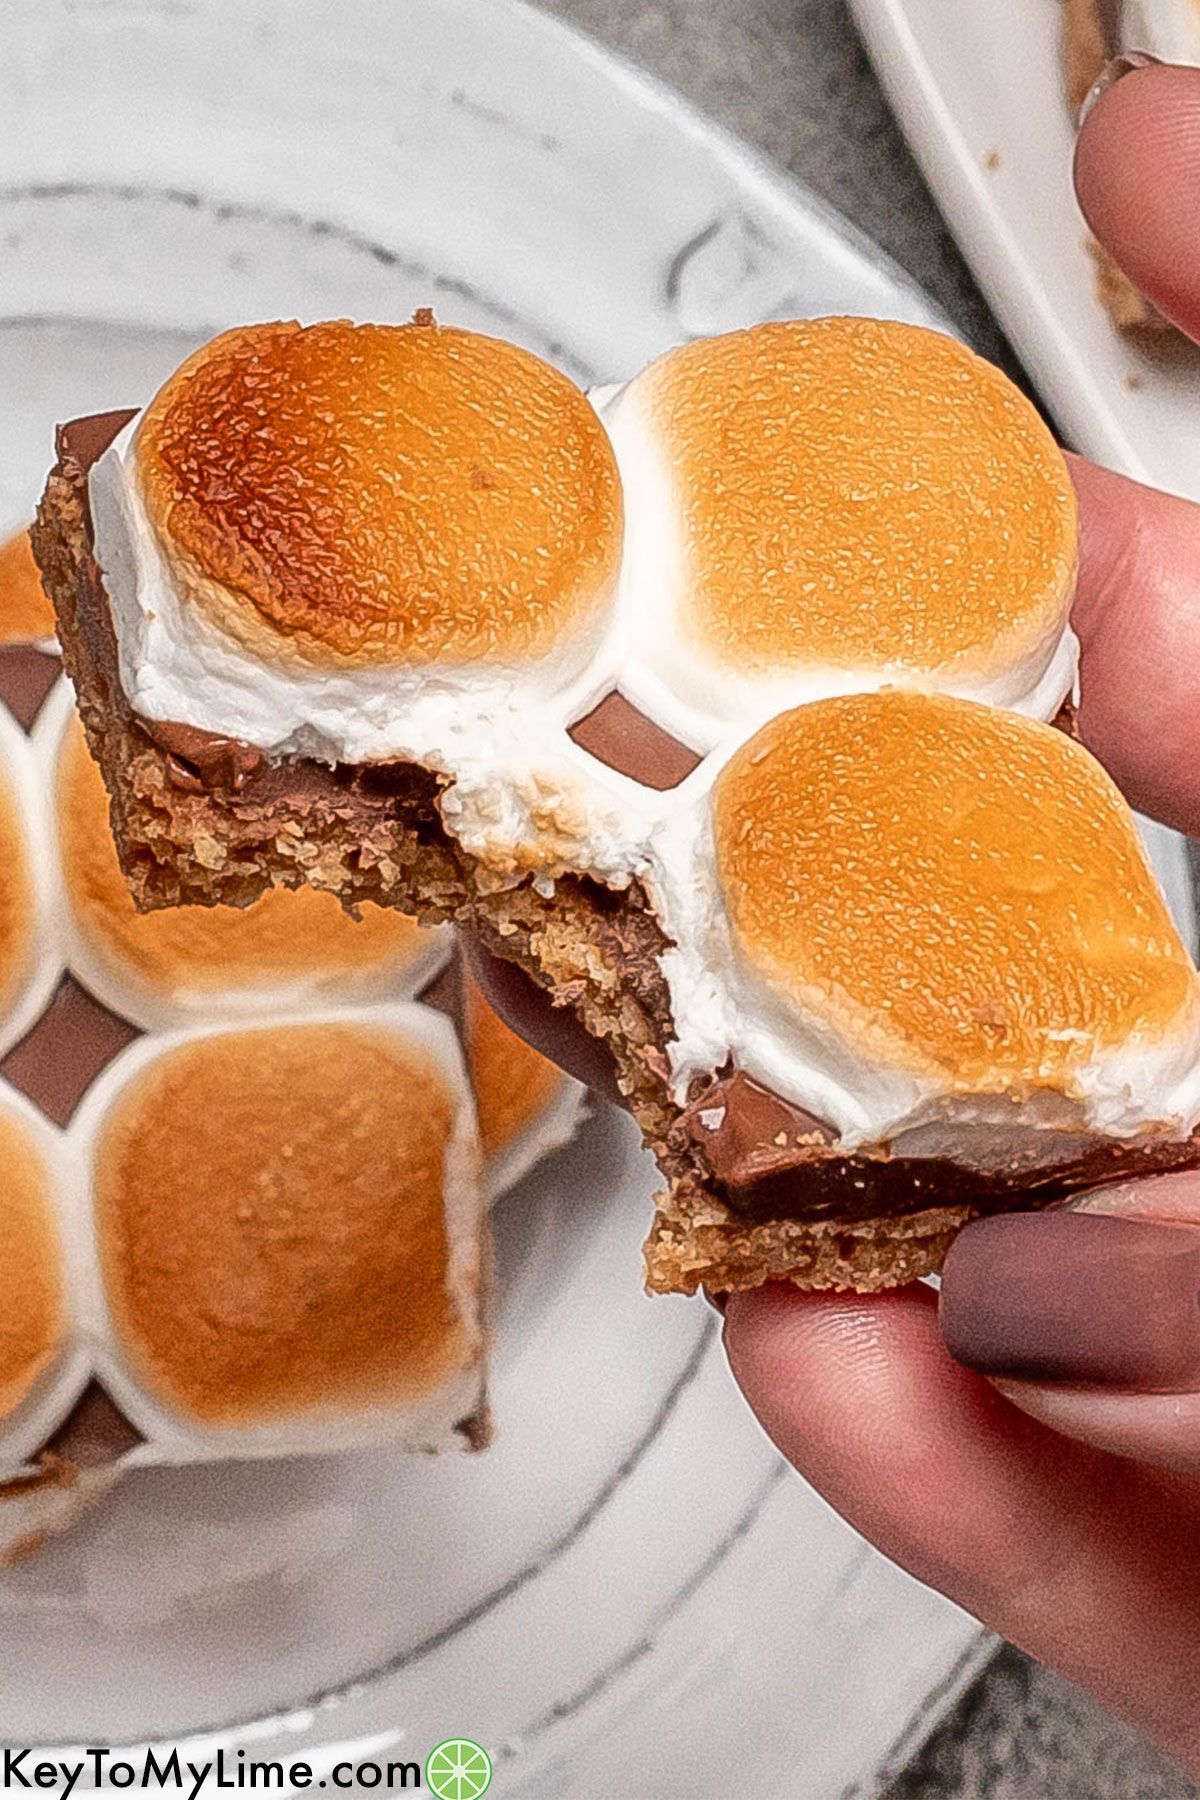 A s'more bars with a bite missing showing the inside texture.